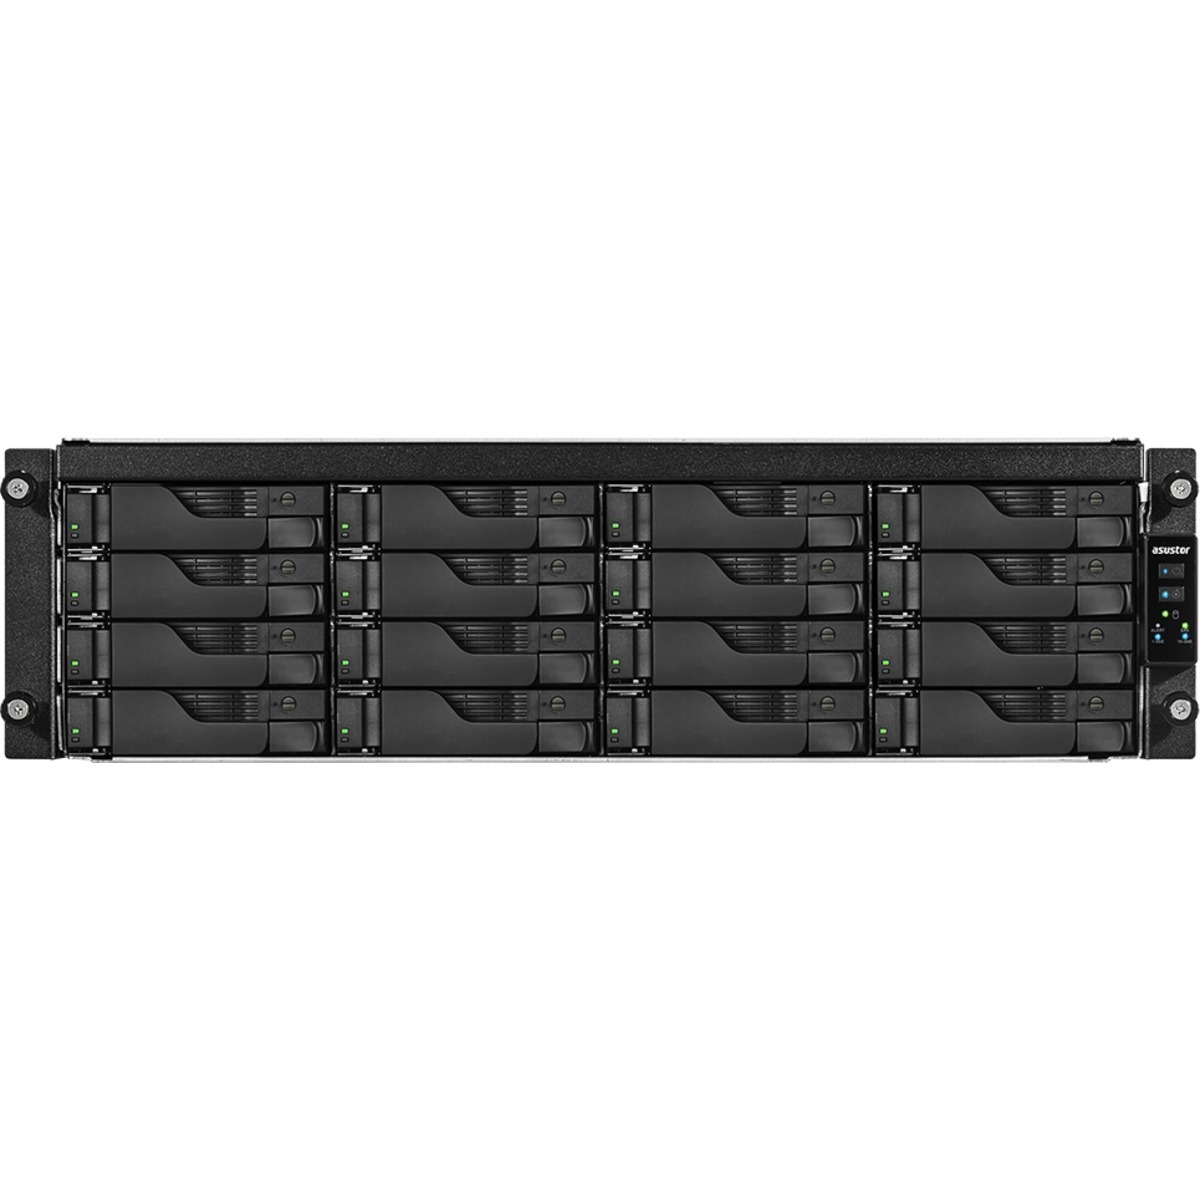 buy ASUSTOR AS7116RDX Lockerstor 16R Pro RackMount NAS - Network Attached Storage Device Burn-In Tested Configurations - nas headquarters buy network attached storage server device das new raid-5 free shipping usa christmas new year holiday sale AS7116RDX Lockerstor 16R Pro